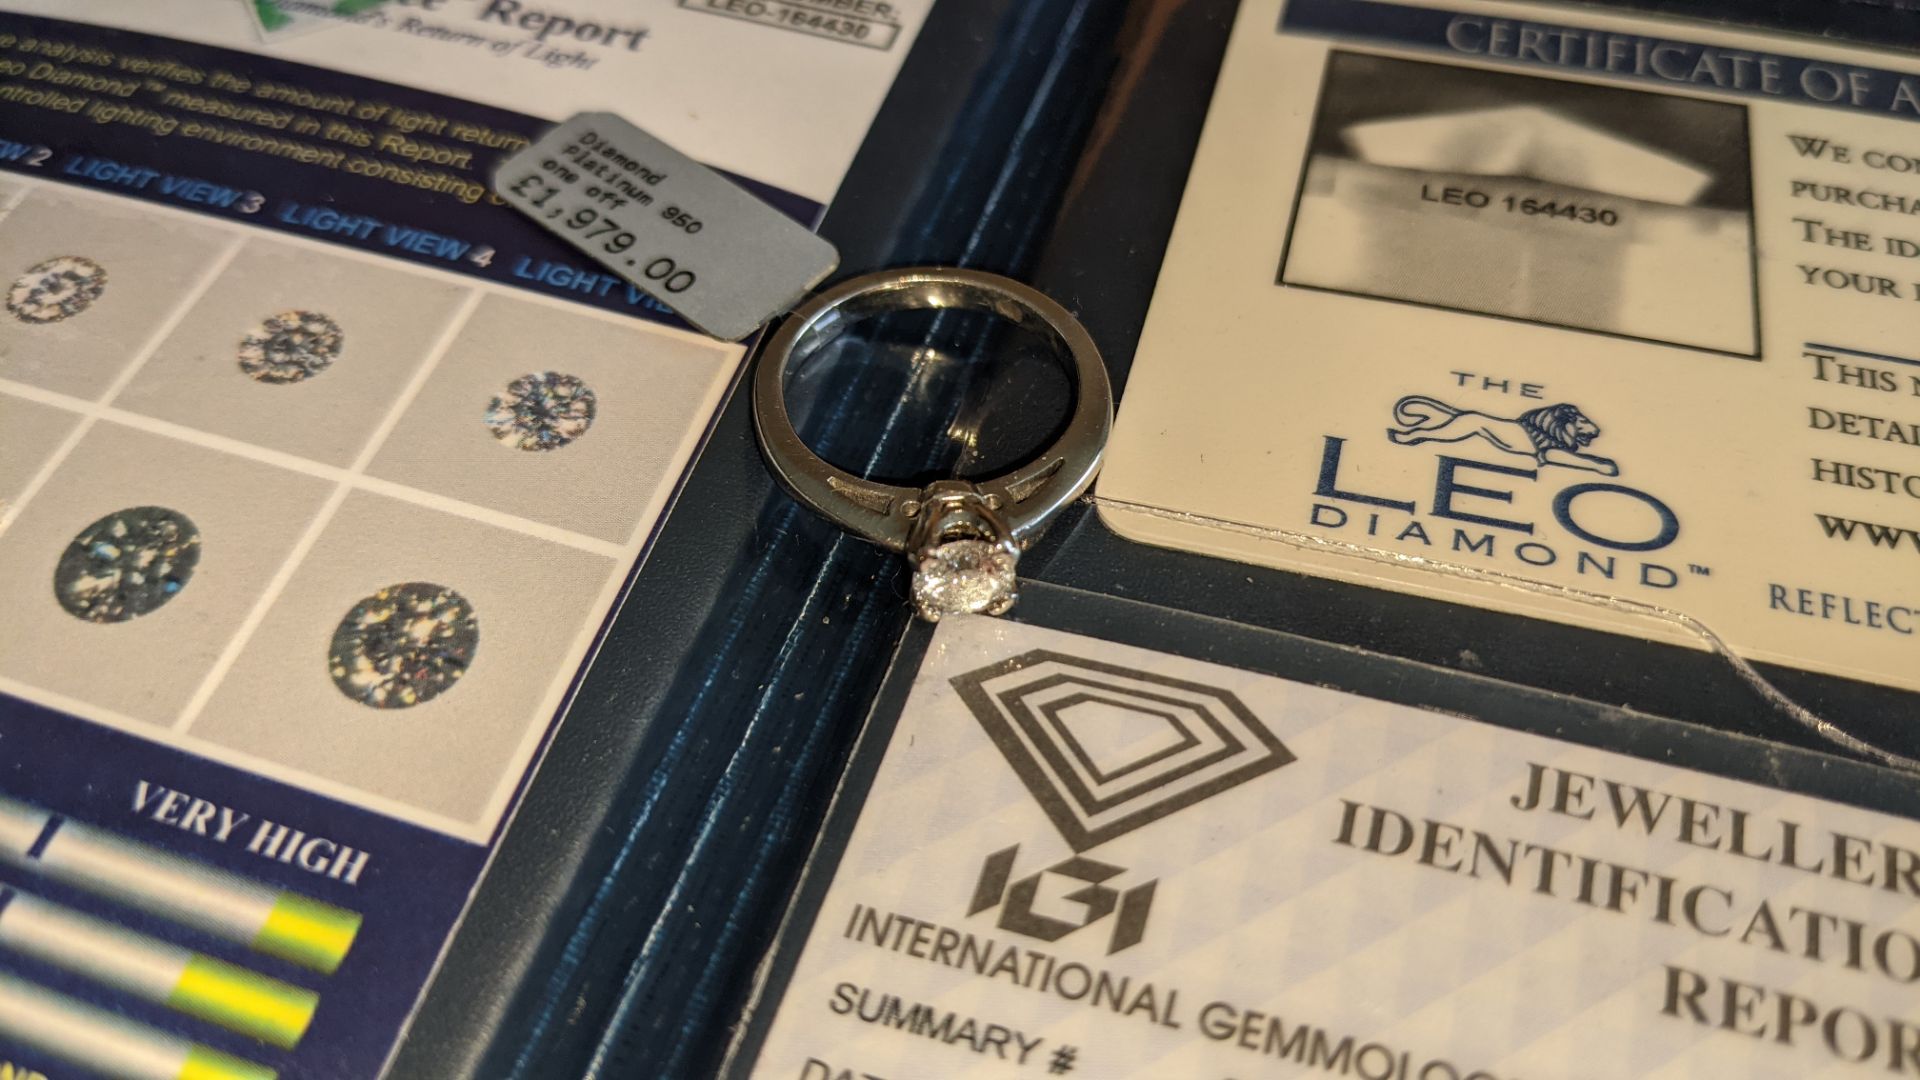 Platinum 950 ring with 0.50ct diamond. Includes diamond report/certification indicating the central - Image 23 of 25